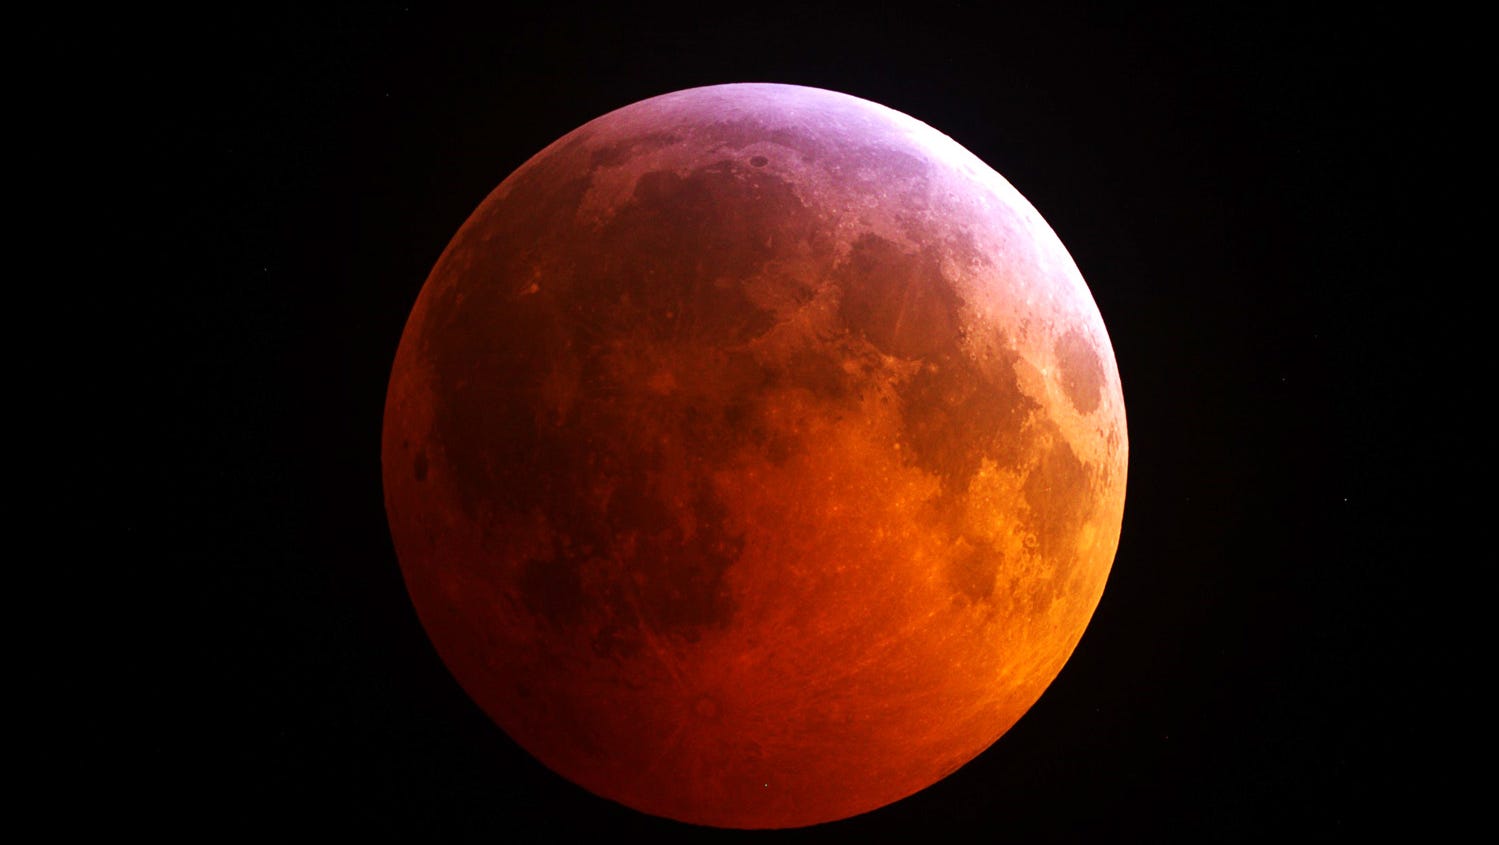 How to see the total lunar eclipse and supermoon on Sunday, Jan. 20